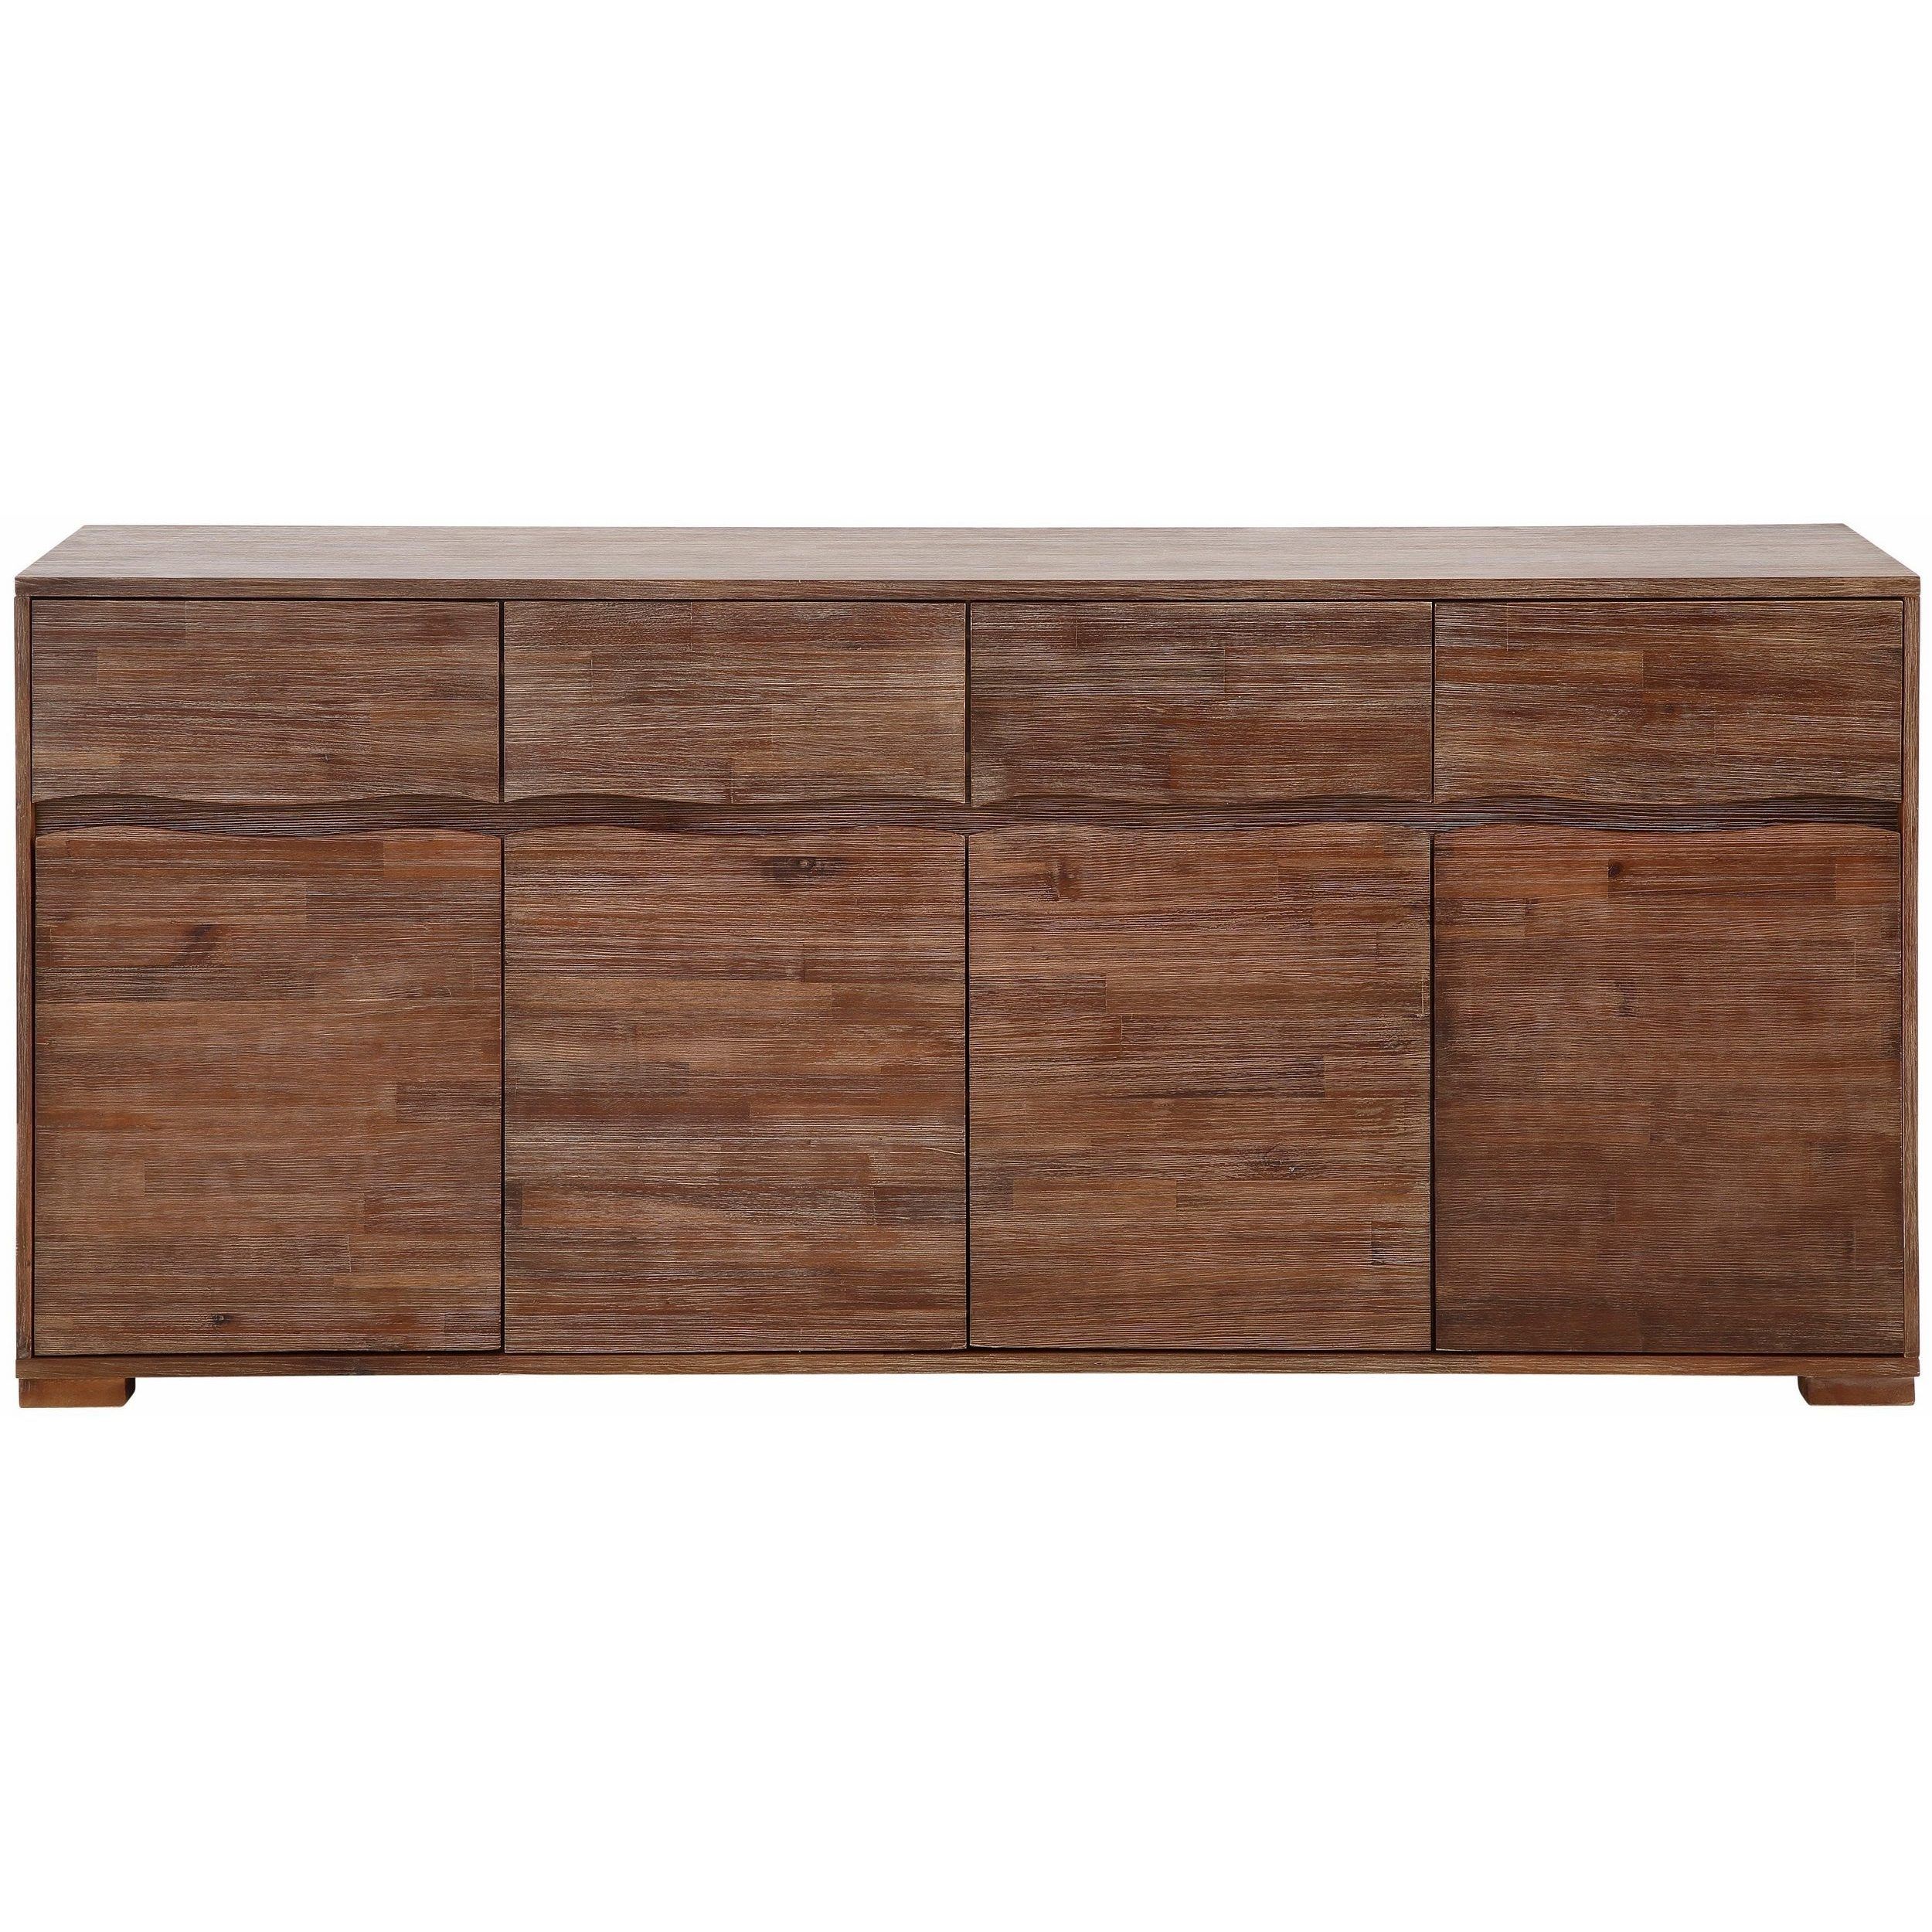 Shop Surf Sideboard With 4 Doors And 4 Drawers, Acacia Wood – On With Regard To Burn Tan Finish 2 Door Sideboards (View 17 of 30)